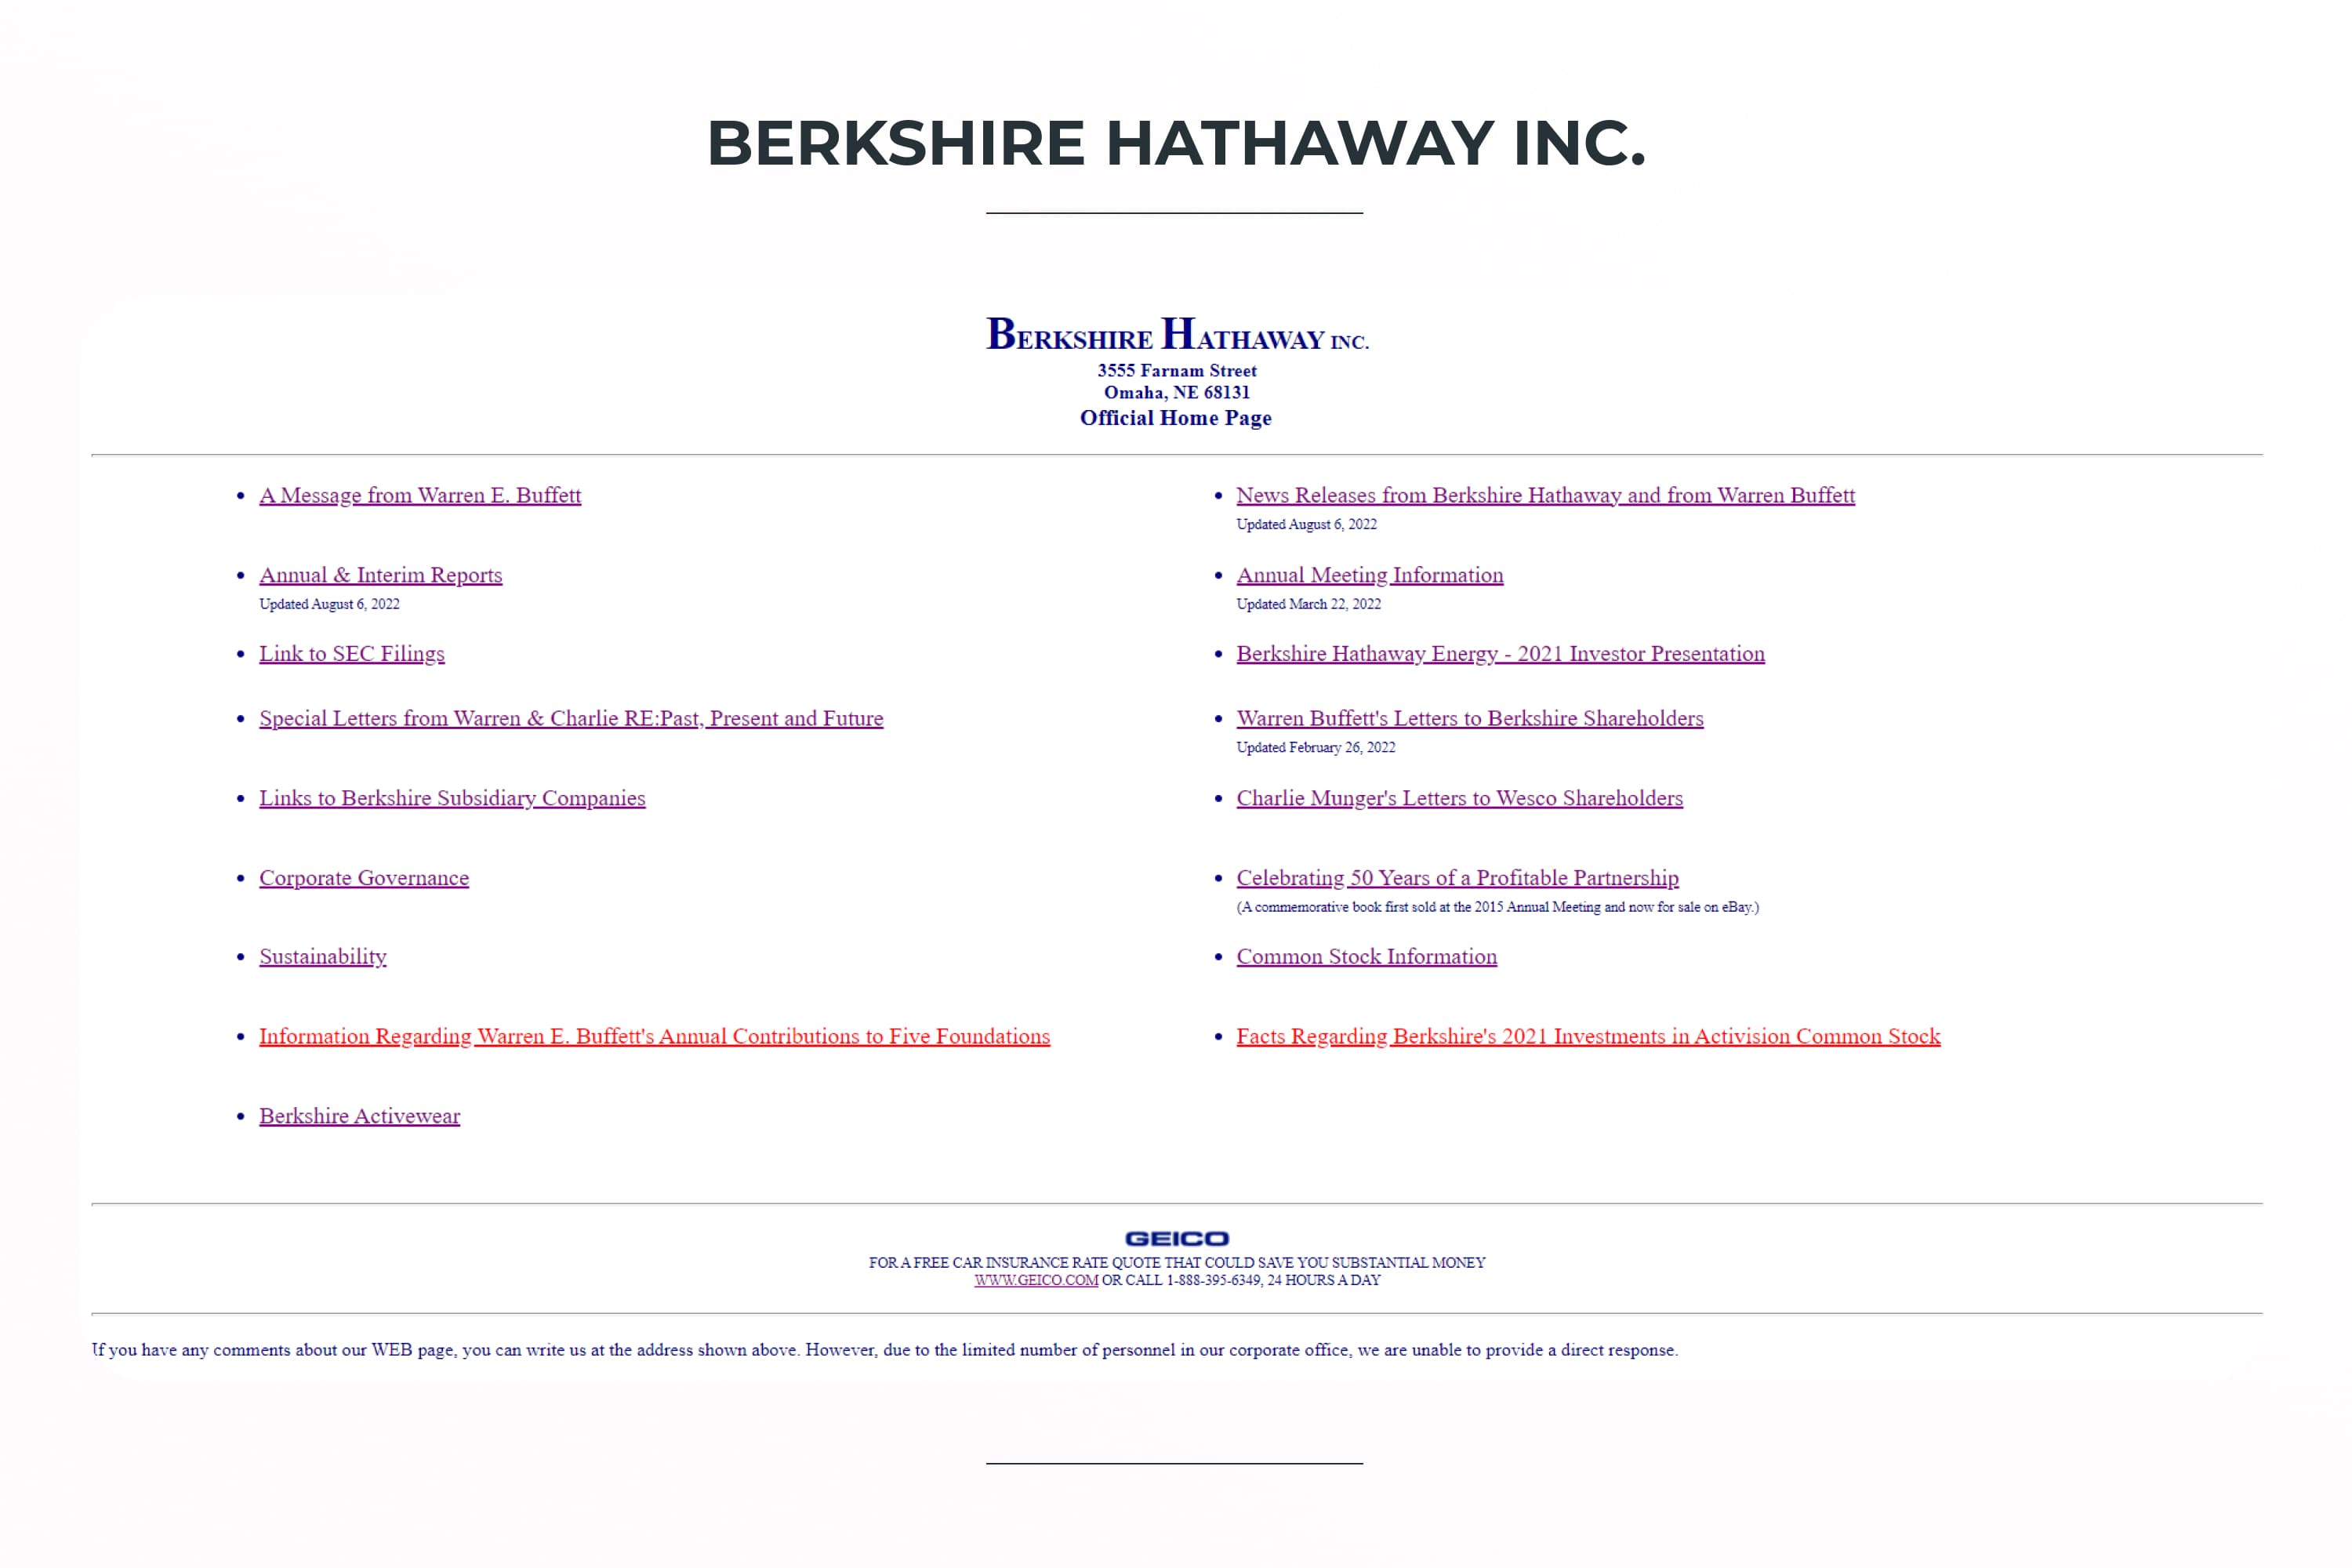 Main page of the Berkshire Hathaway Inc website.